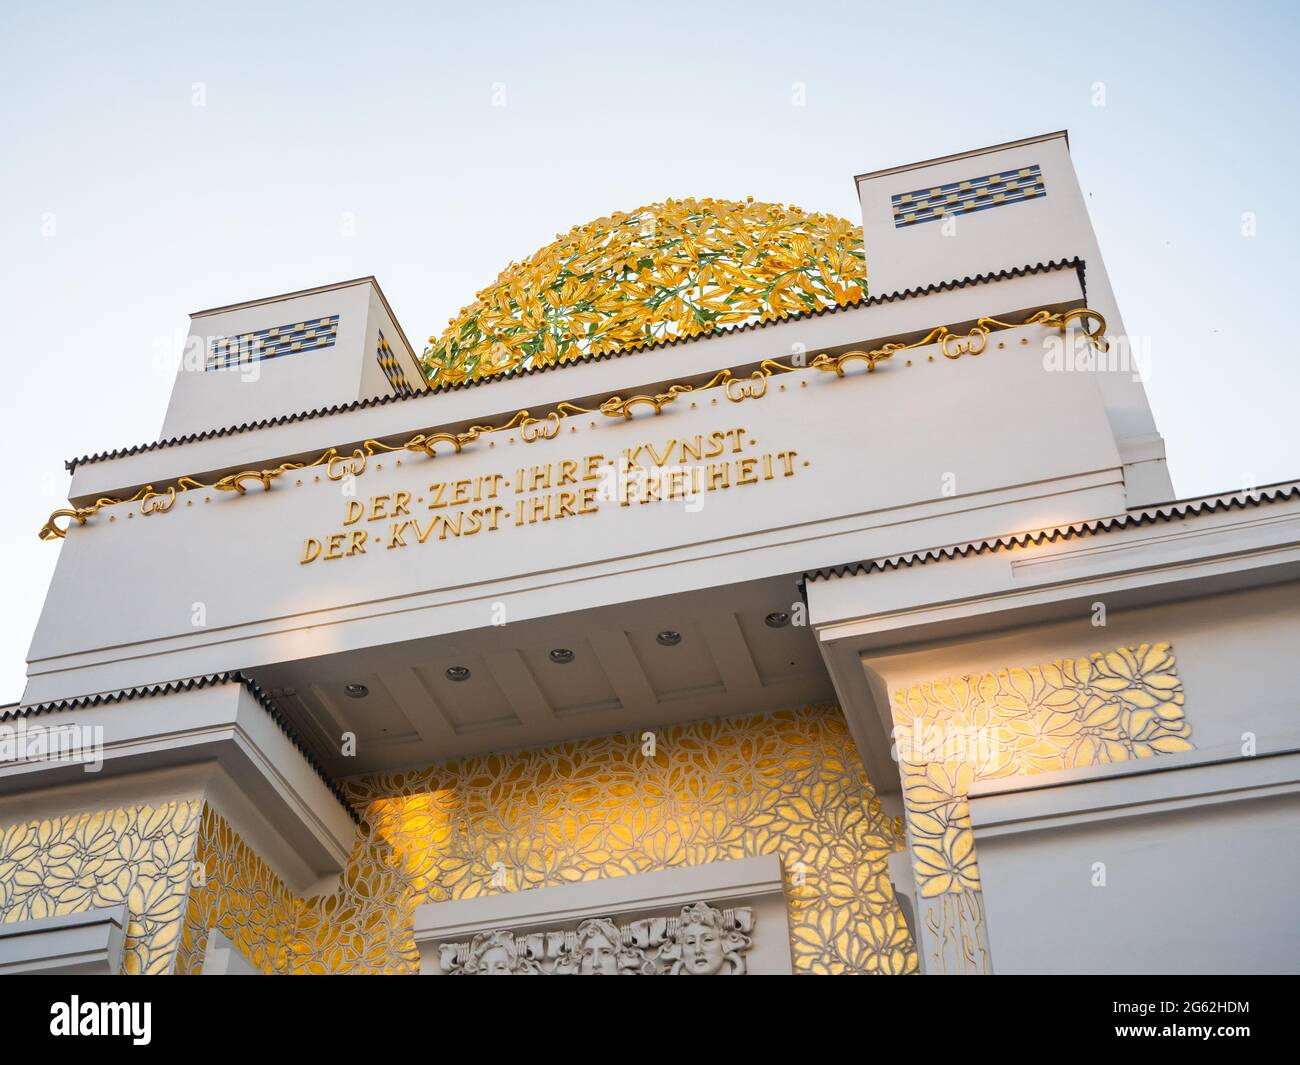 Secession Building Golden Dome in Vienna, Austria also called Wiener Secession - with Inscription 'To Every Age its Art, to Every Art its Freedom'. Stock Photo